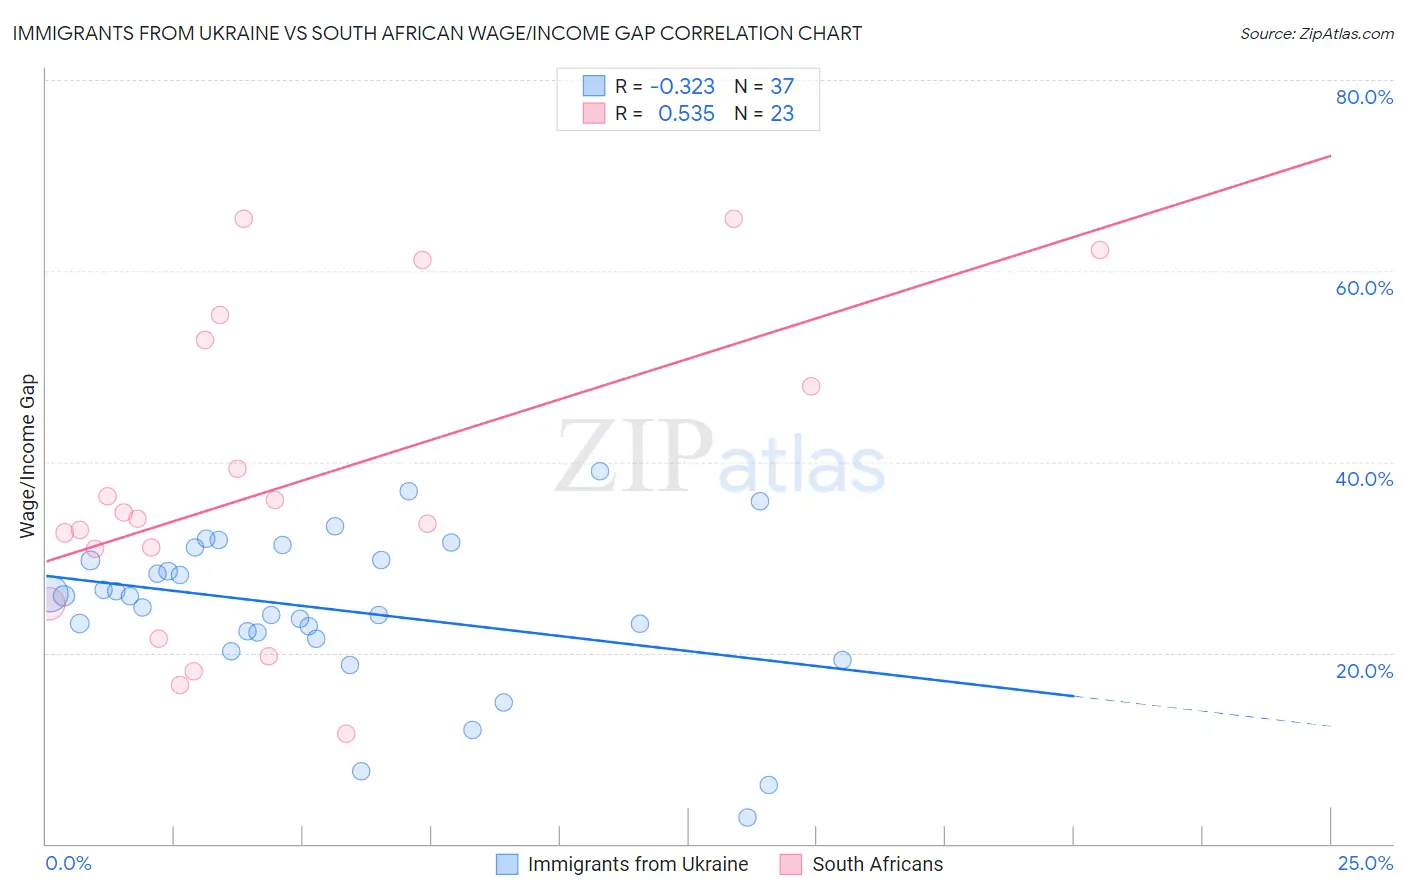 Immigrants from Ukraine vs South African Wage/Income Gap